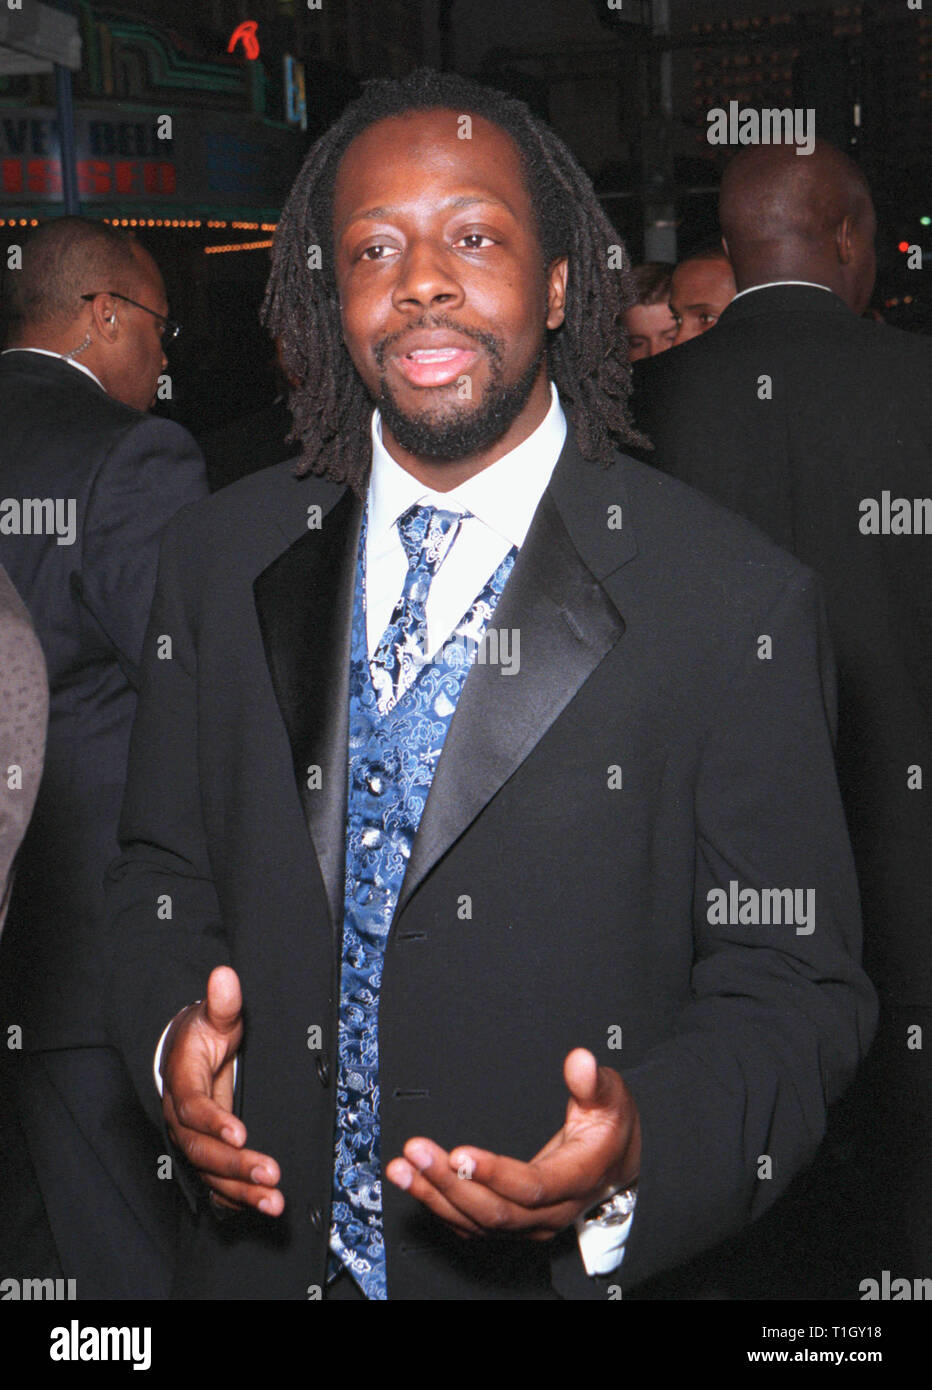 LOS ANGELES, CA - April 14, 1999: Musician WYCLEF JEAN at the world premiere in Los Angeles of 'Life' which stars Eddie Murphy & Martin Lawrence. © Paul Smith / Featureflash Stock Photo